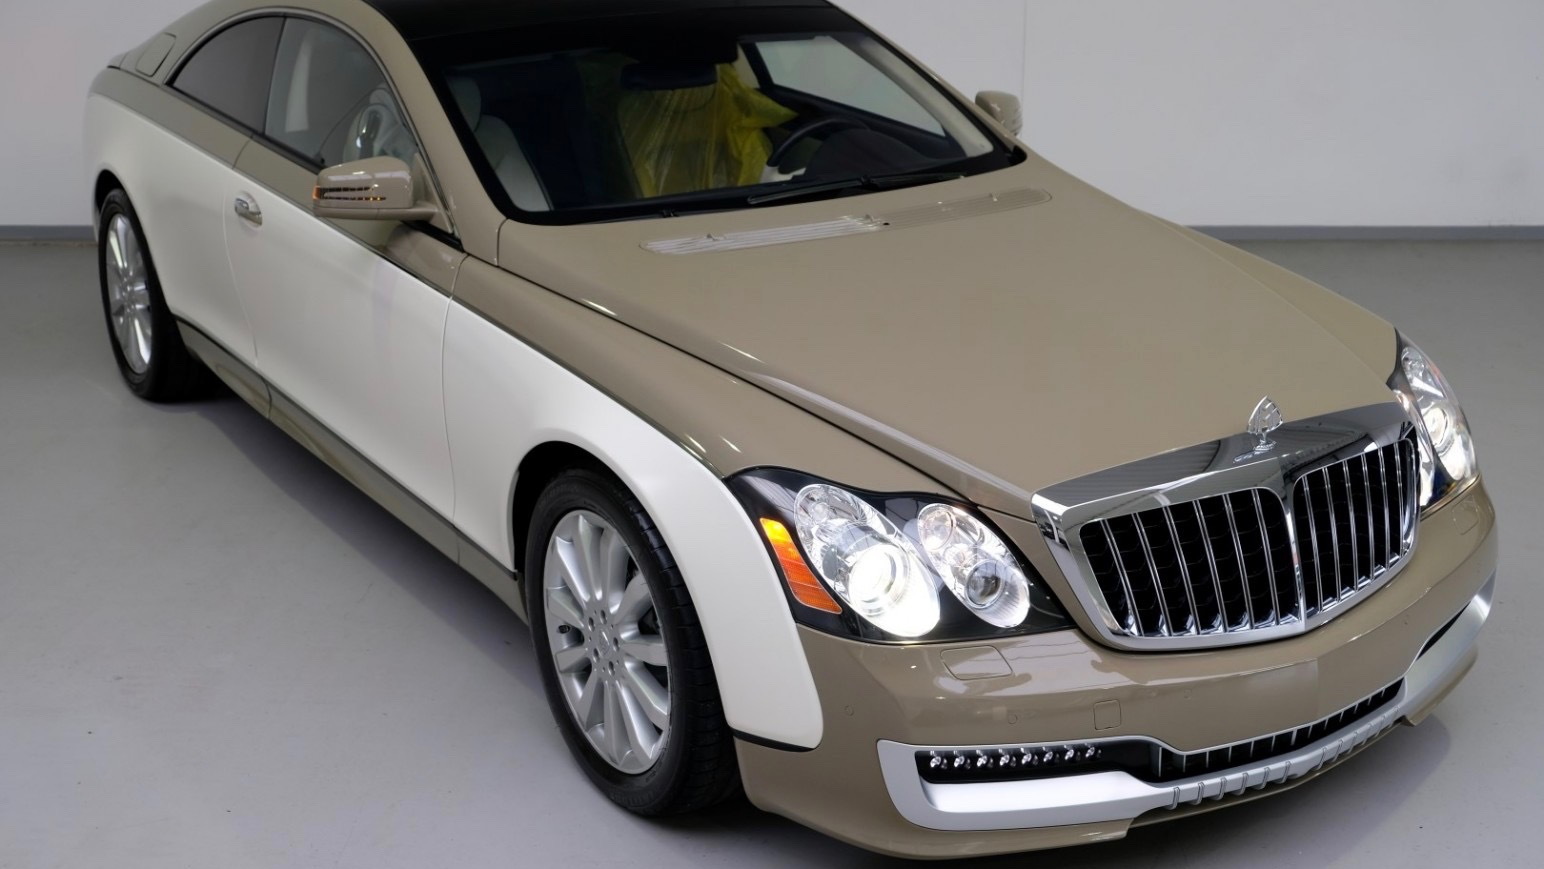 Maybach 57S Coupe built for Muammar Gaddafi (Photo by Autoleitner)